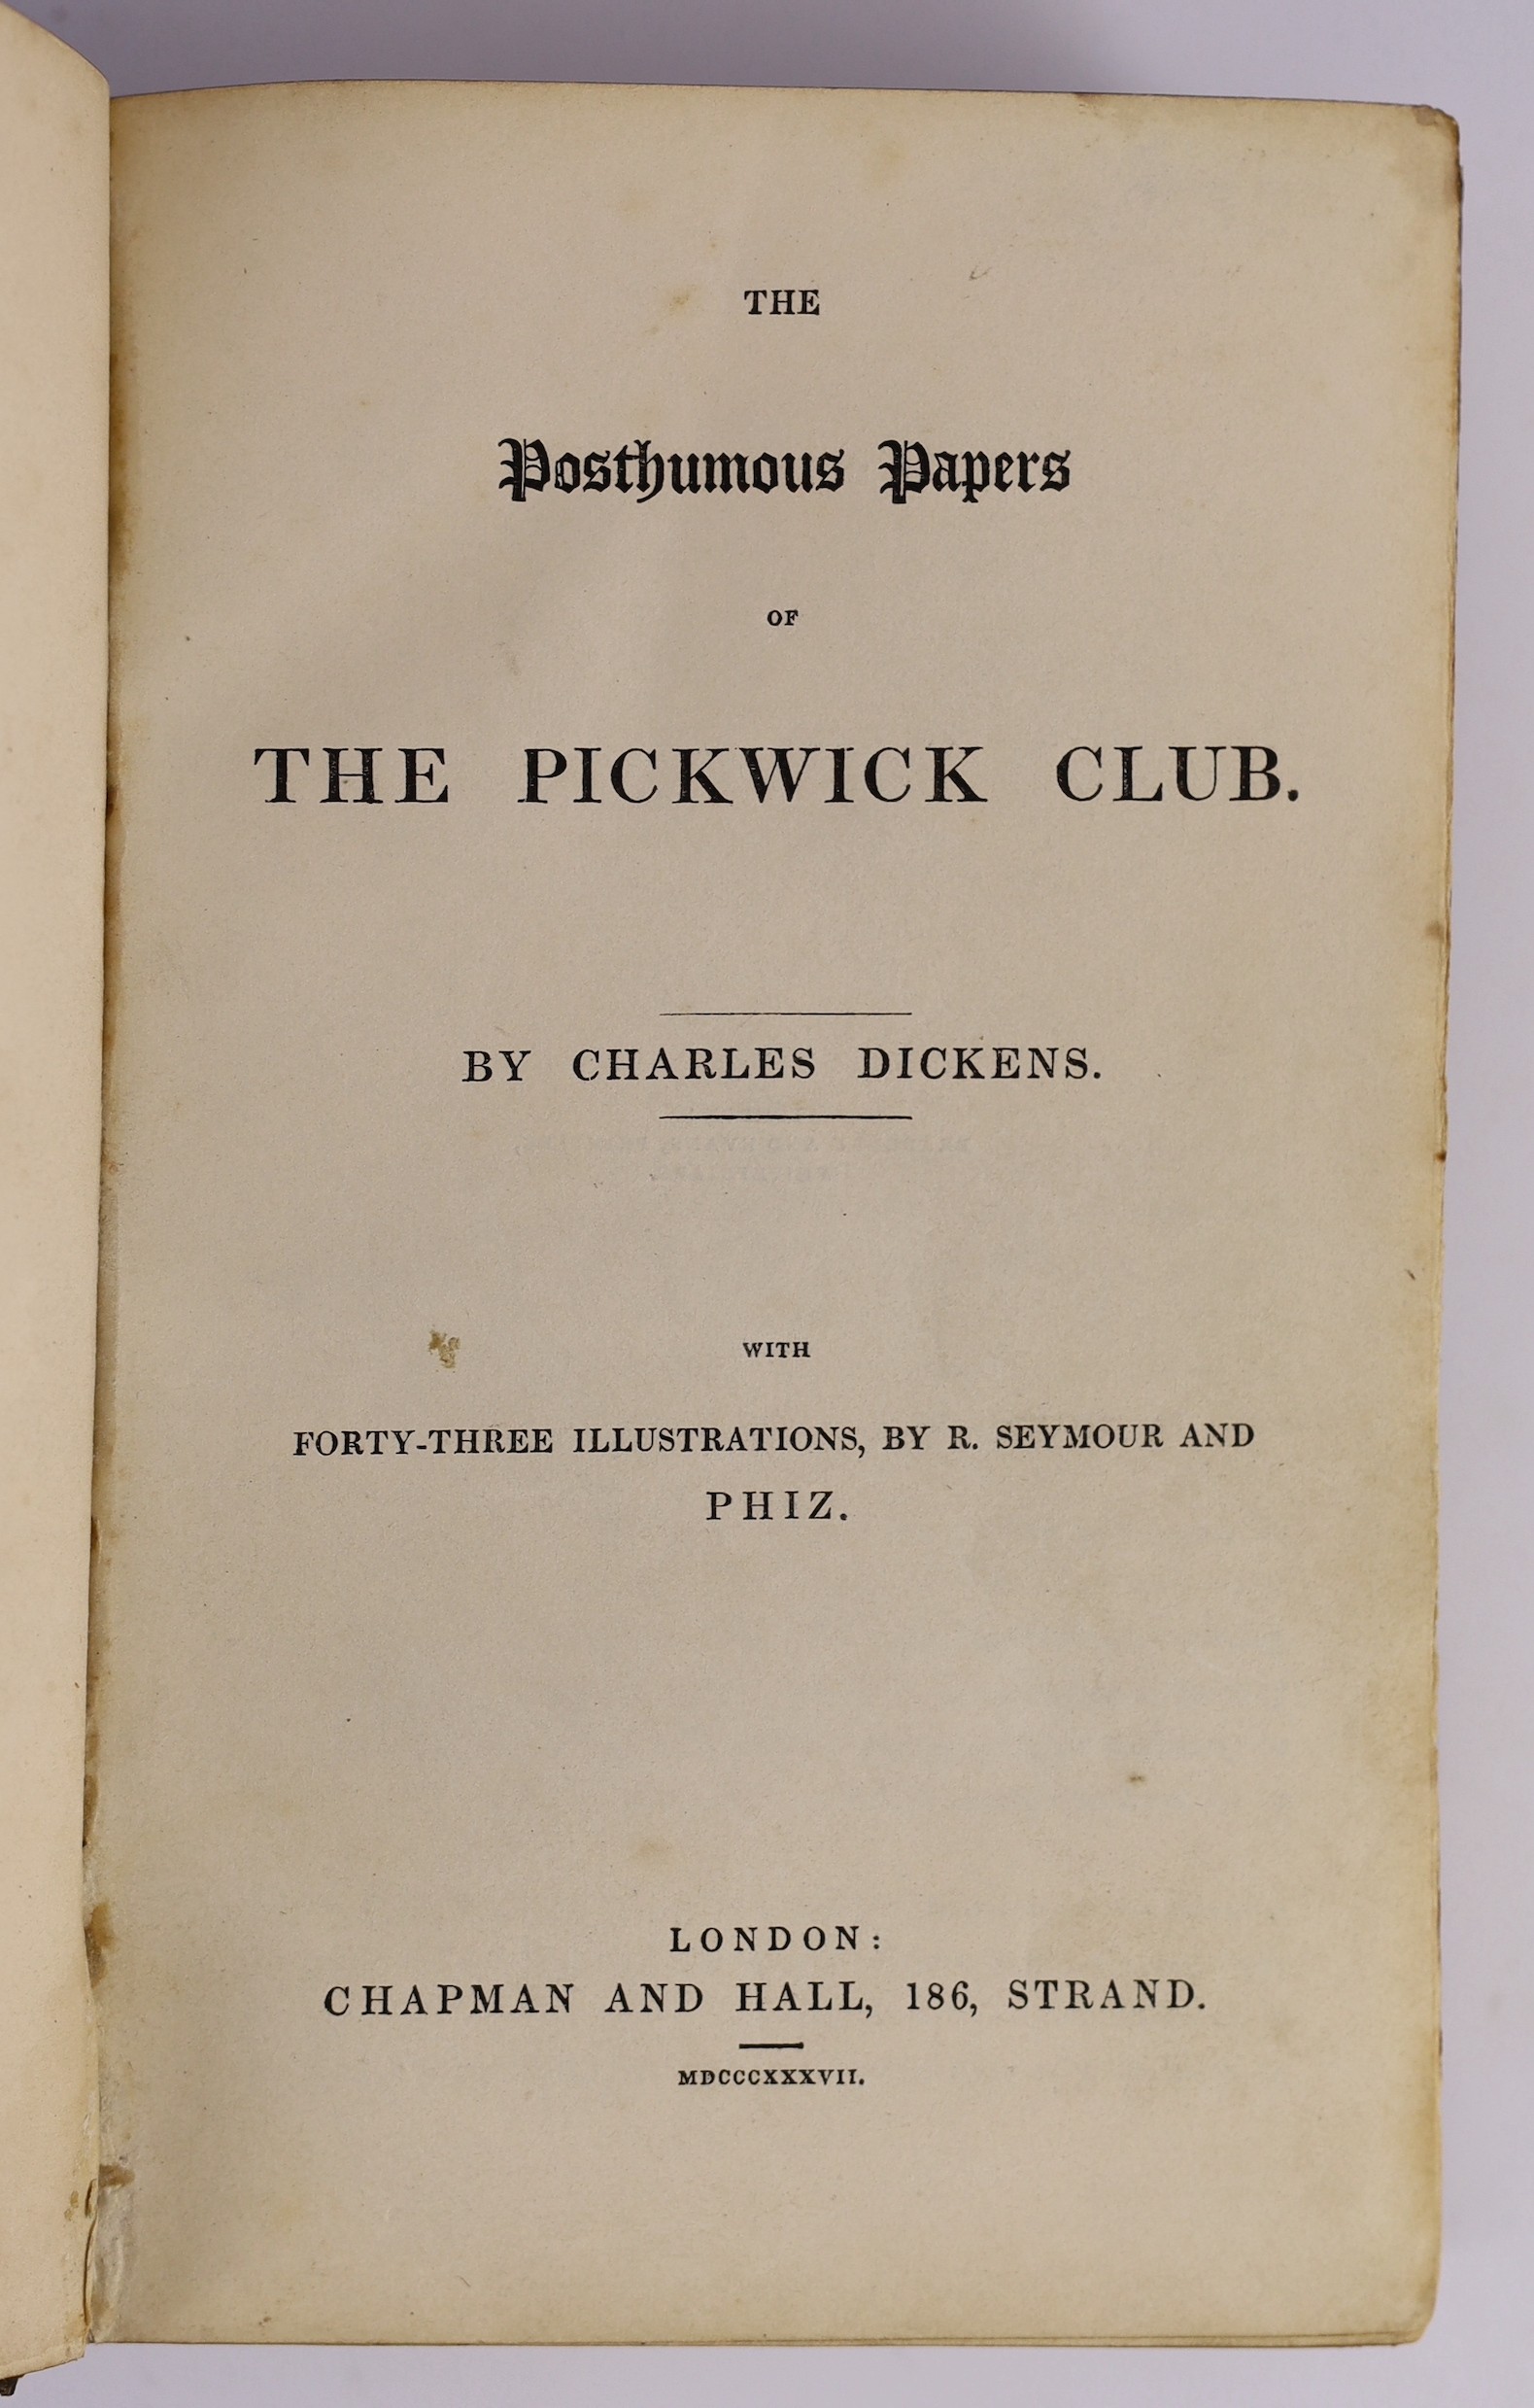 Dickens, Charles - The Posthumous Papers of the Pickwick Club. ‘’Pickwick Papers’’, 1st edition in book form, with mixed 1st state points, stab holes present, 8vo, half calf with marbled boards by Rivière & Son, with fro